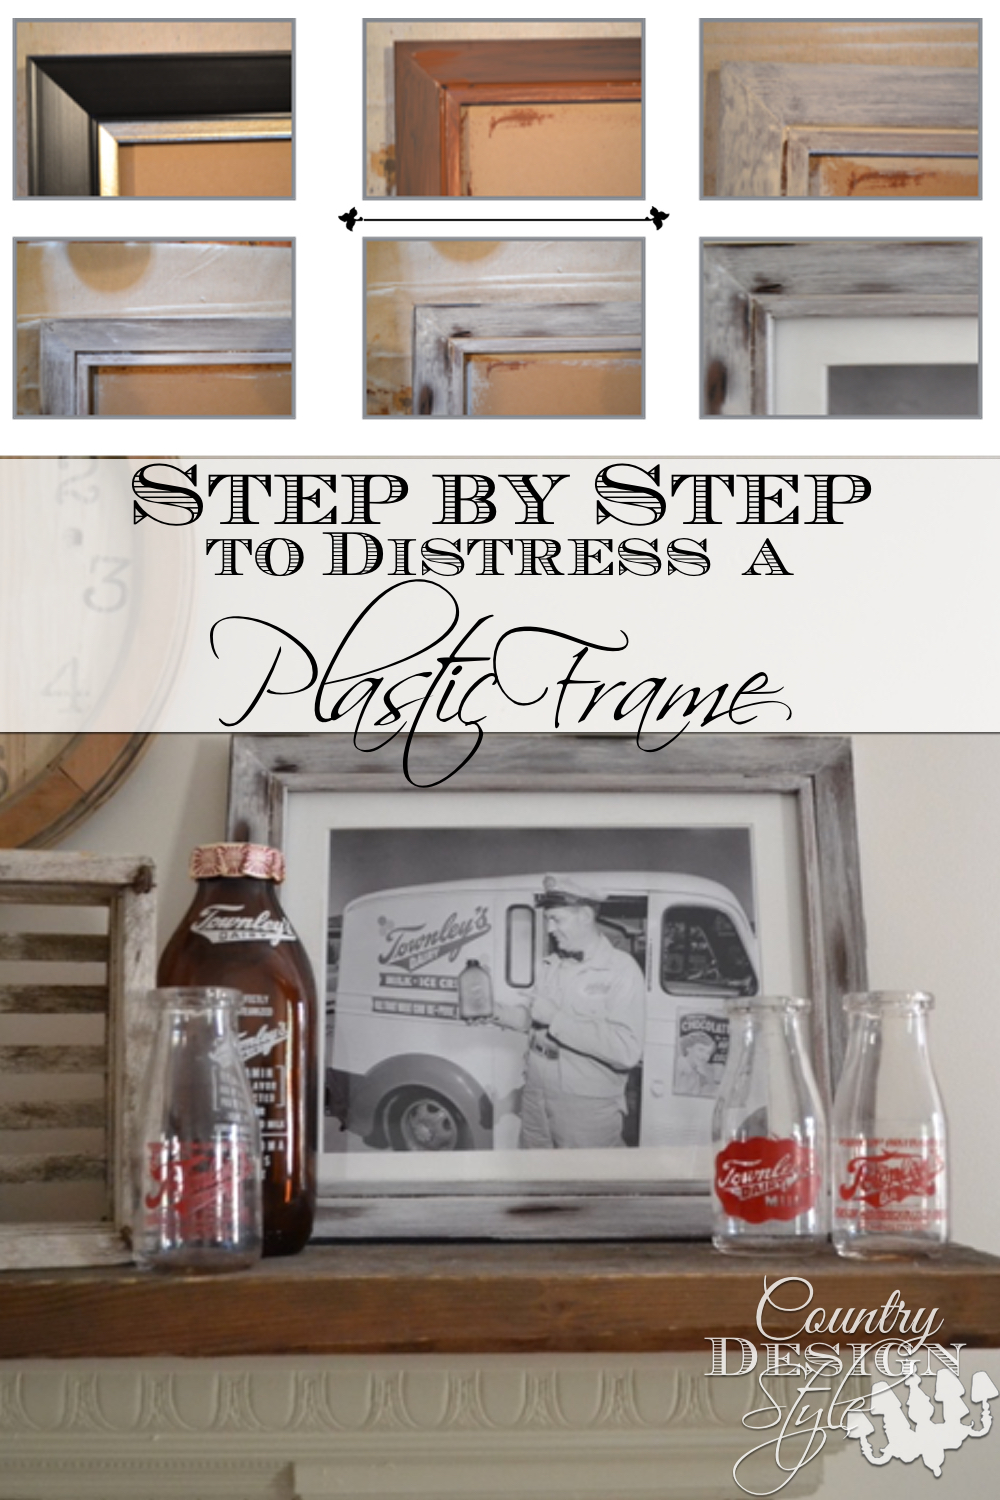 Step by step DIY project distressing a plastic frame. Country Design Style www.countrydesignstyle.com